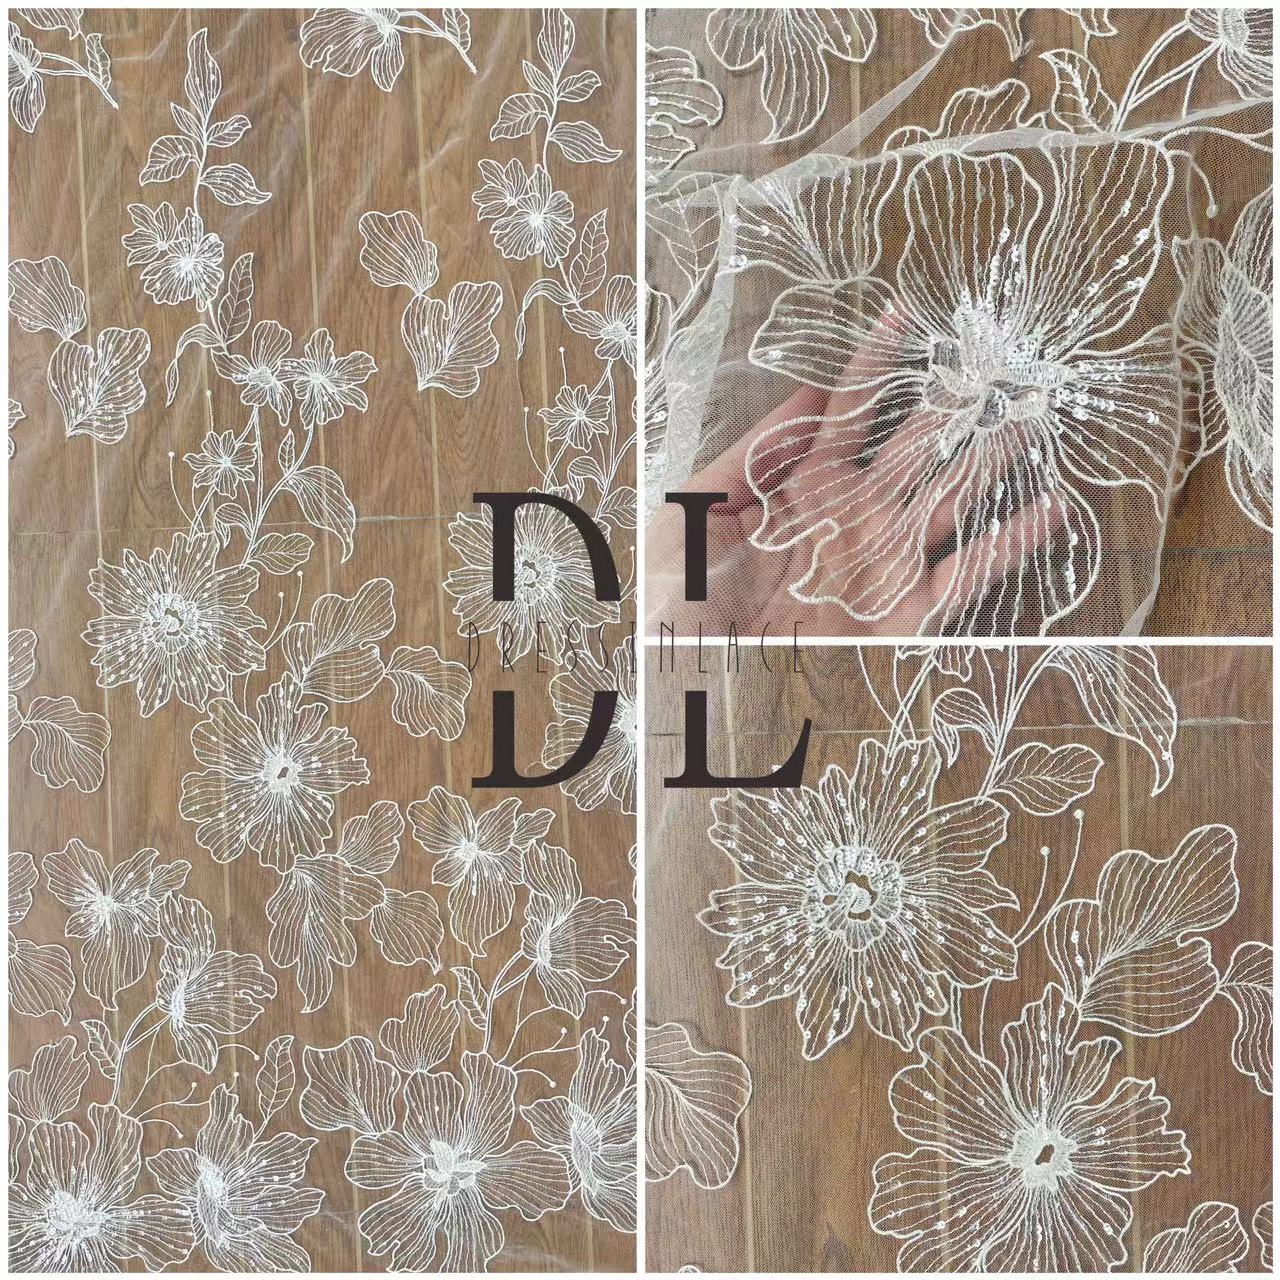 DL130115 Flower Sequins Lace Fabrics - Soft Tulle with Embroidered Flowers - Premium Quality and Affordably Priced - Ideal for Lace Fabric Enthusiasts